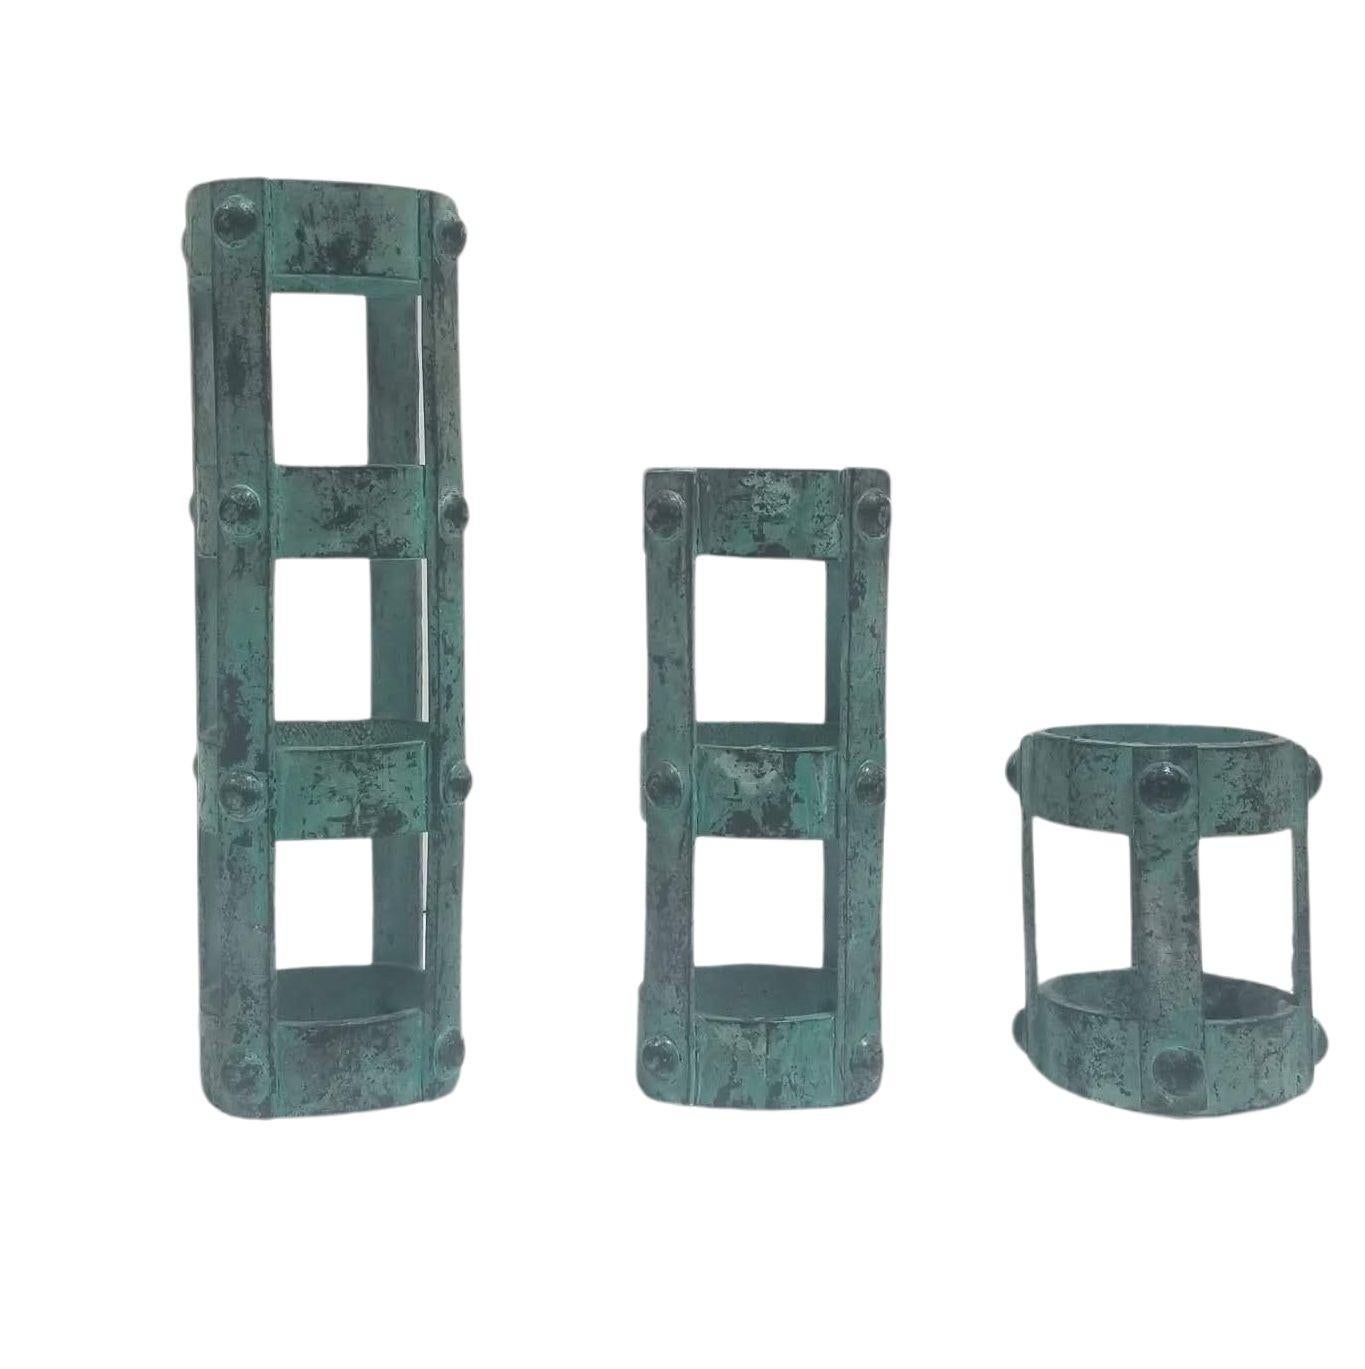 20th Century Set of 3 Brutalist style Candlestick Holders Cage Design For Sale